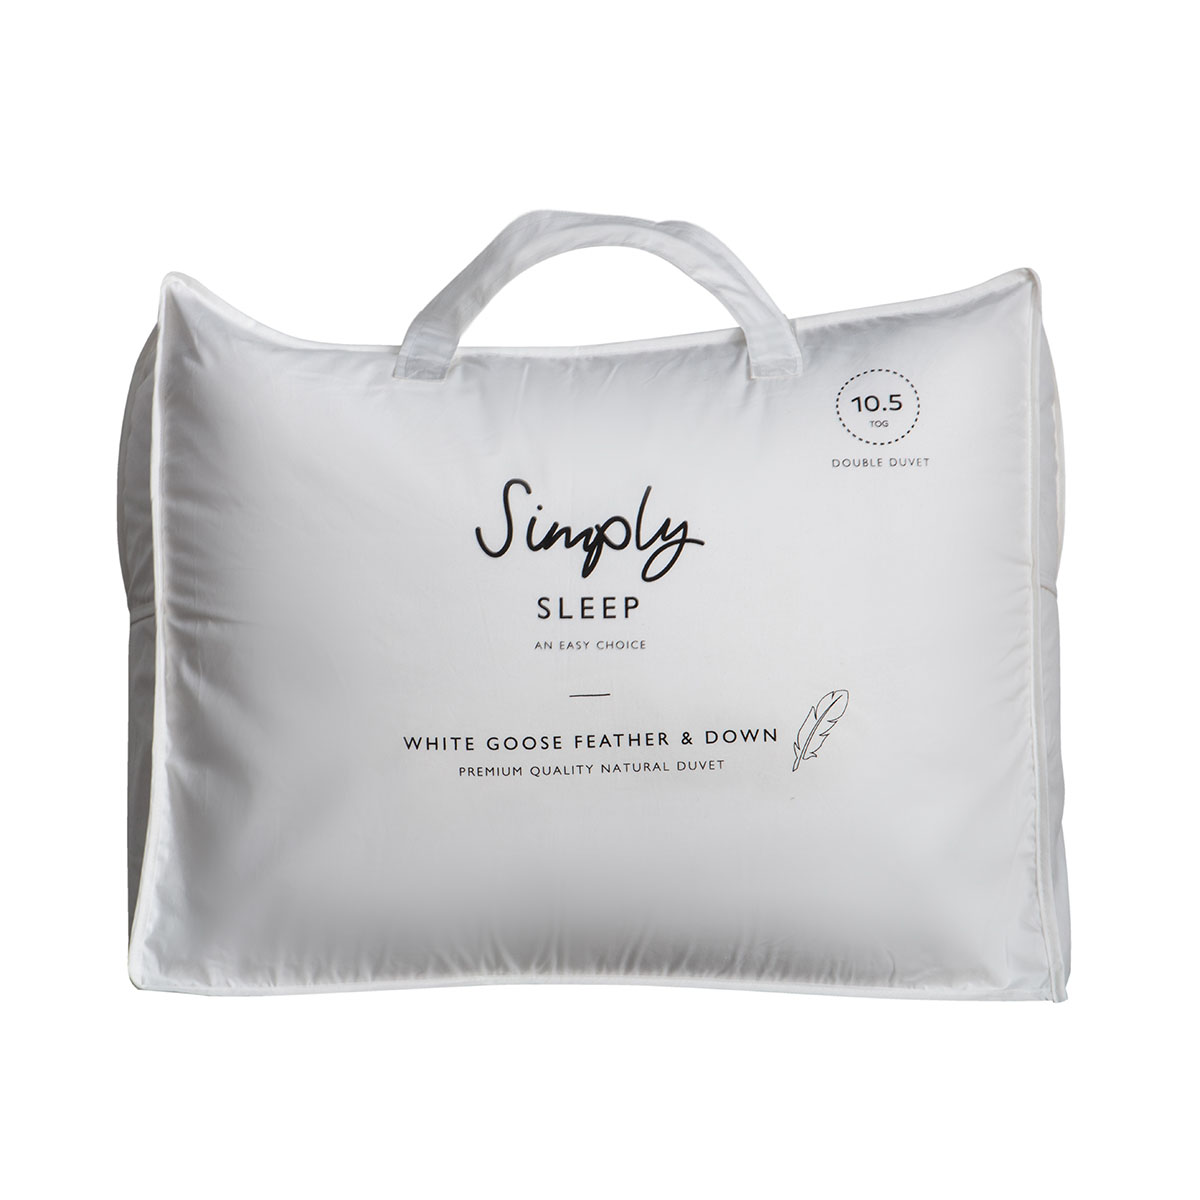 SS White Goose Feather & Down Single Duvet 10.5tog